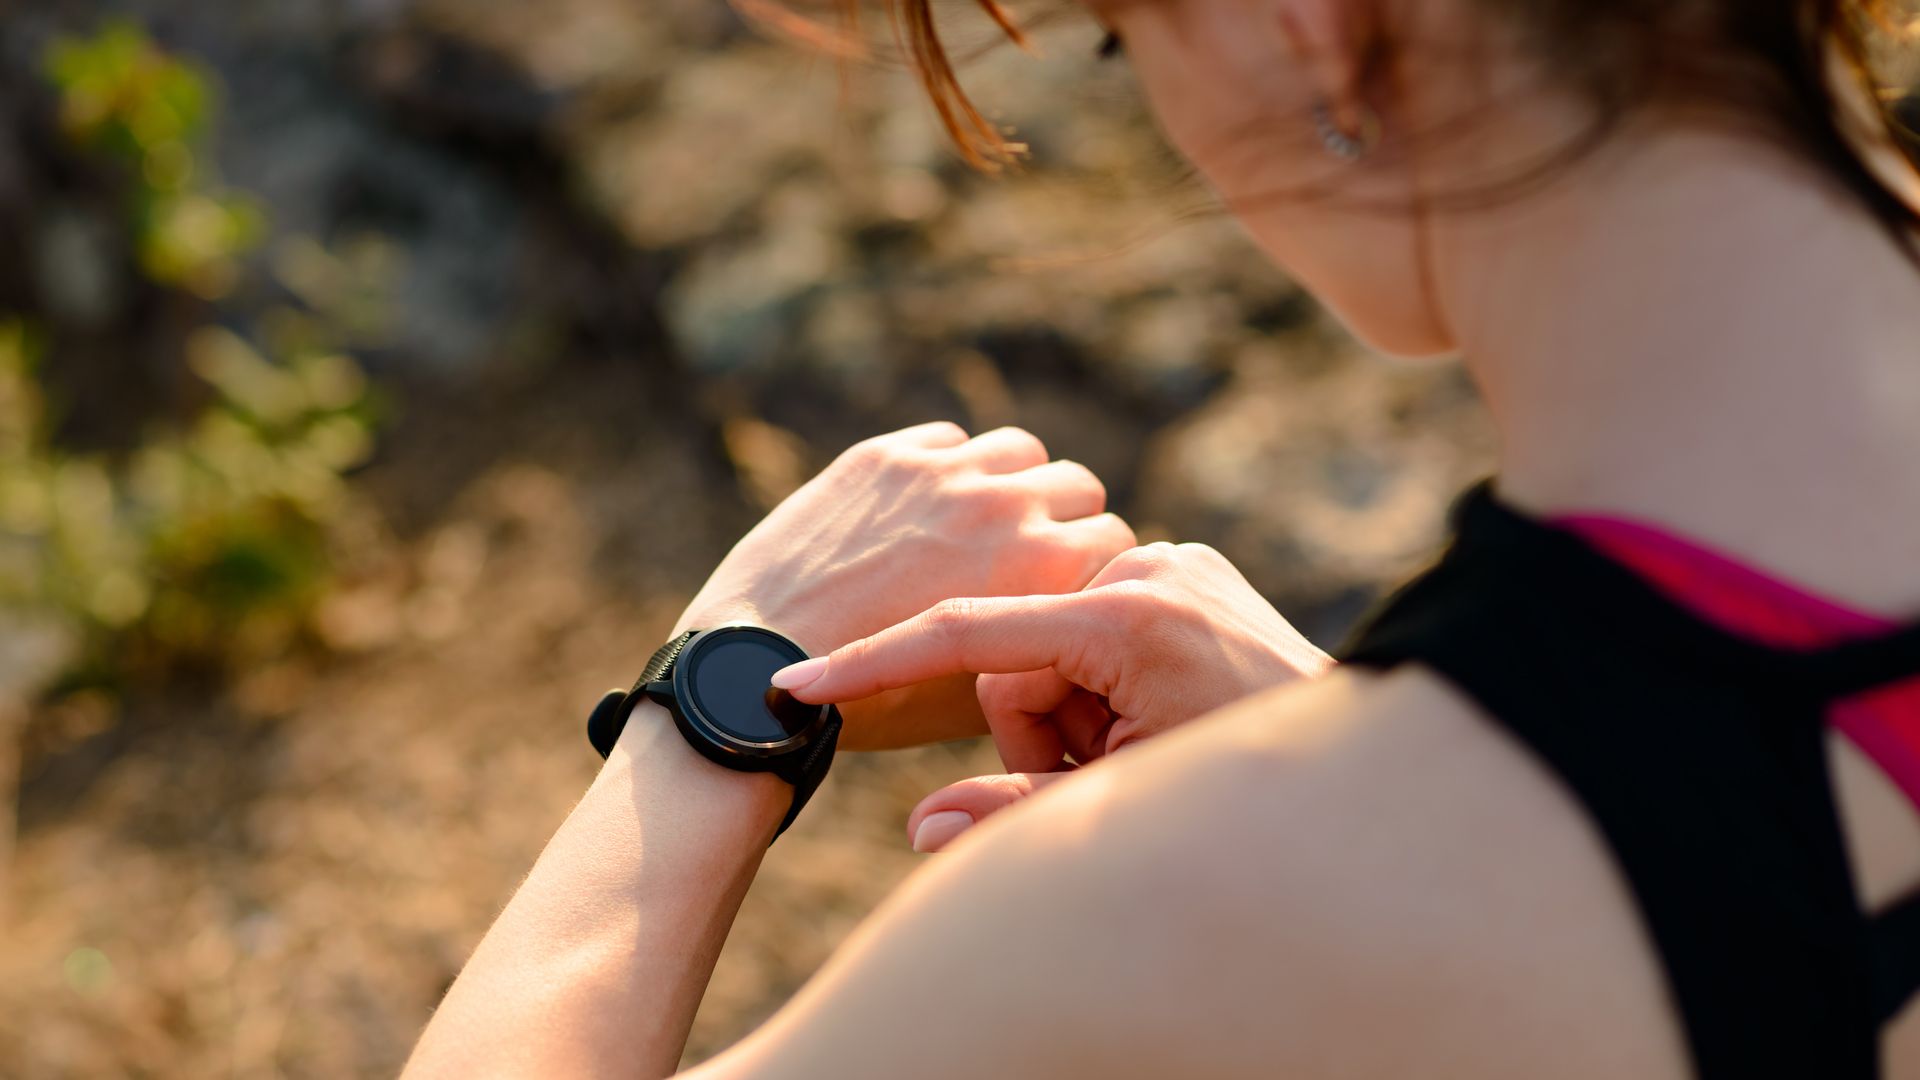 Woman using a watch while exercising.